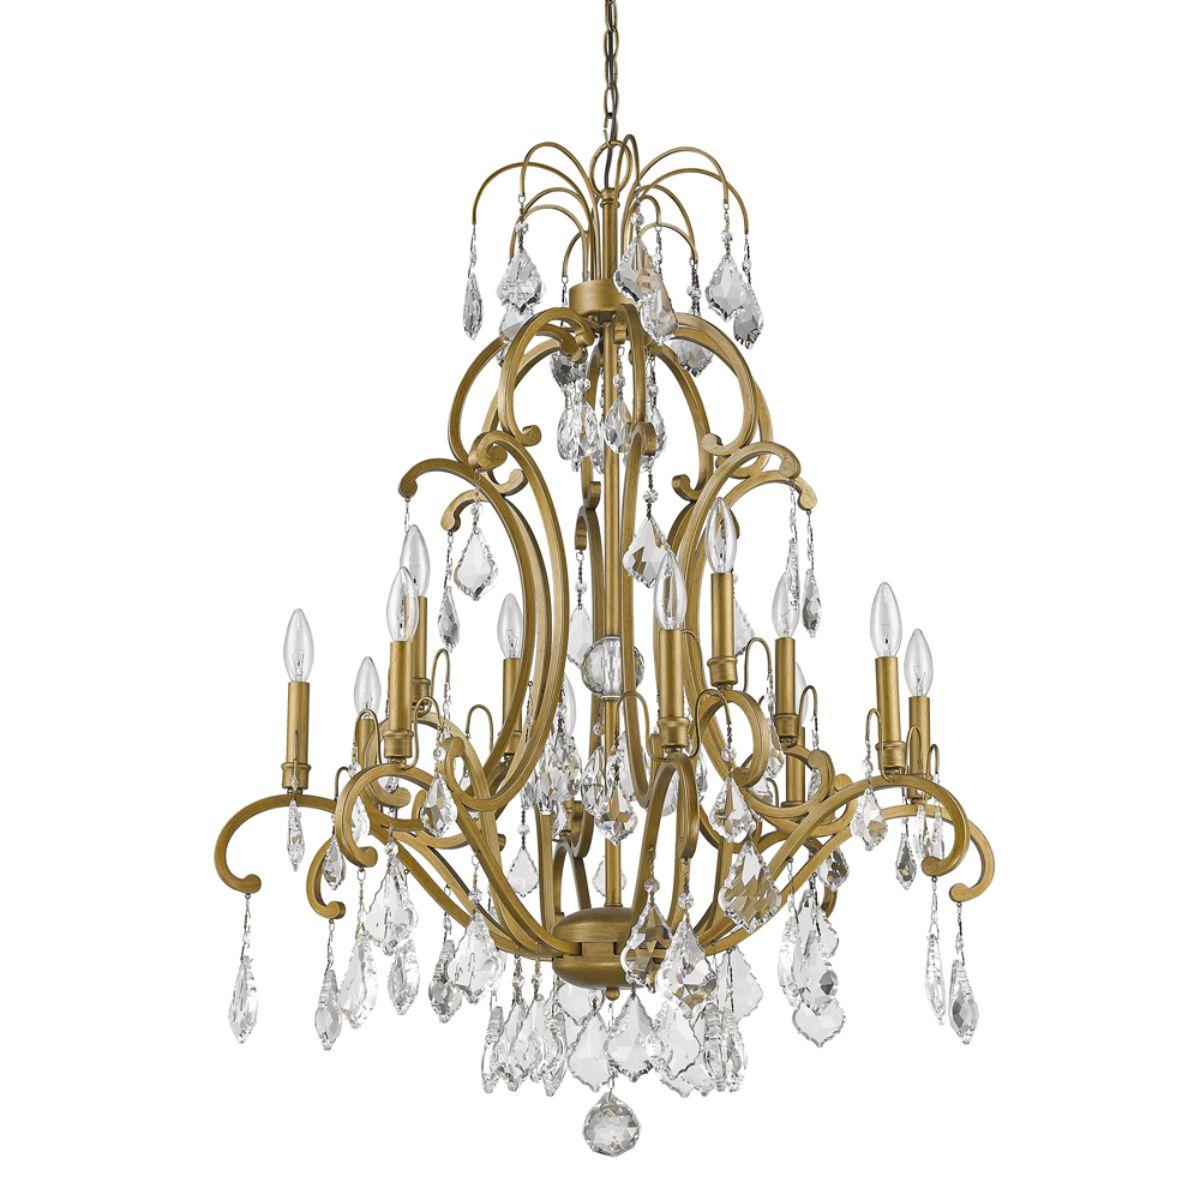 Claire 32 in. 12 Lights Chandelier with Crystal Accents